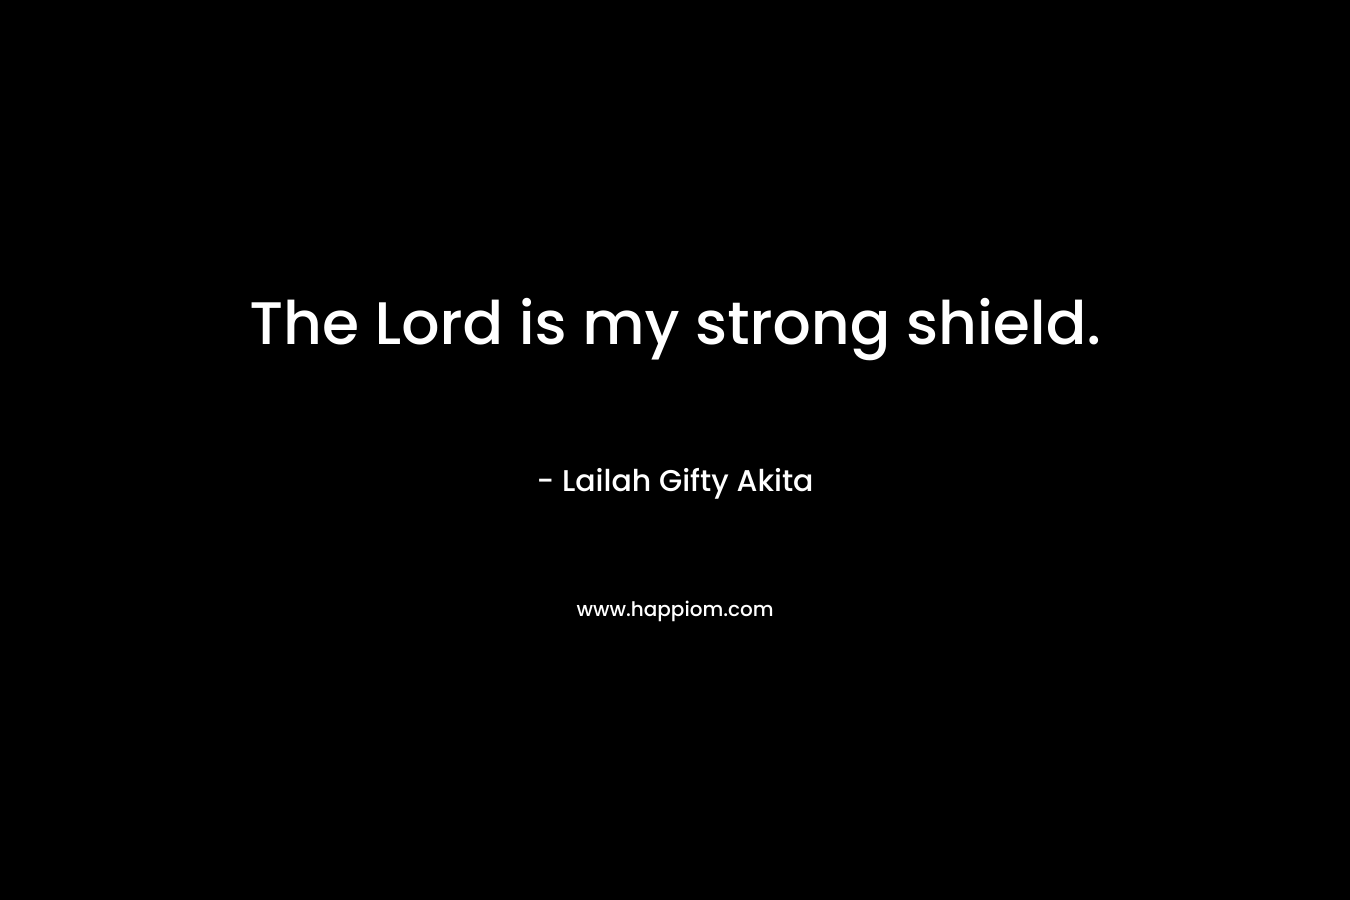 The Lord is my strong shield.